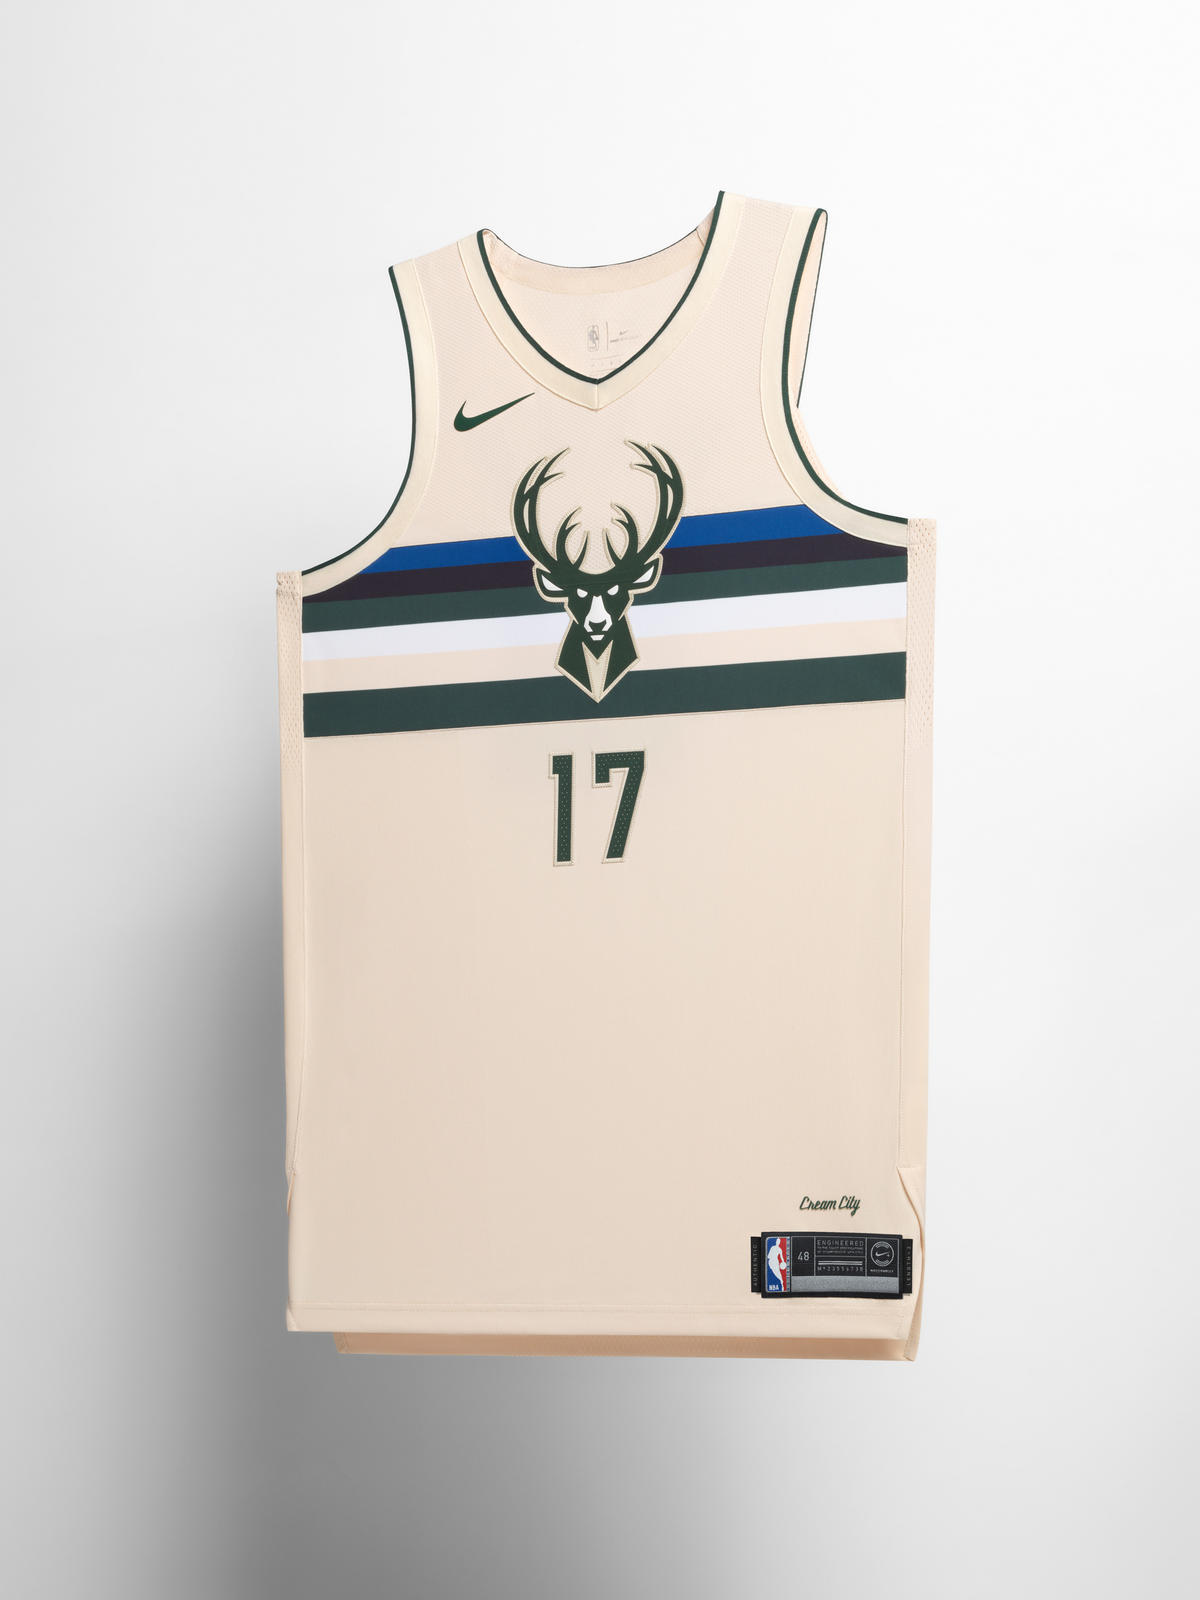 NBA City Edition Jerseys: The Best and the Worst – UMass